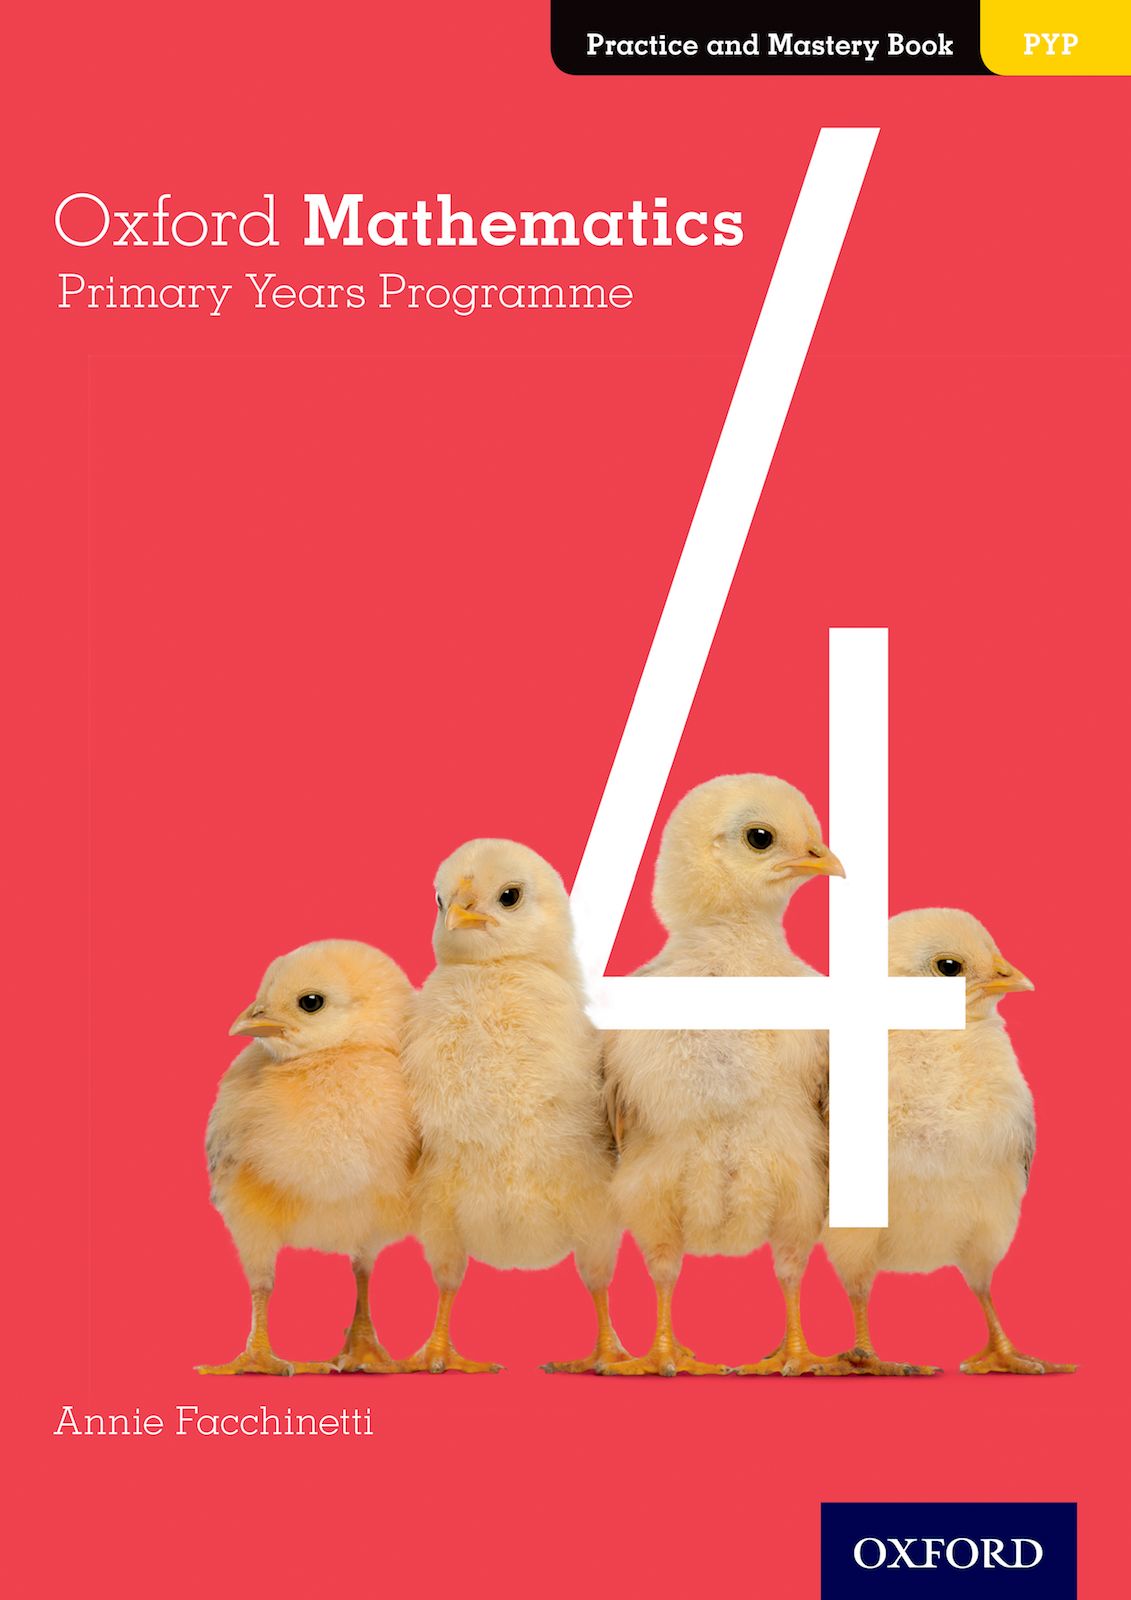 Featured image for “Oxford Mathematics Primary Years Programme Practice and Mastery Book 4”